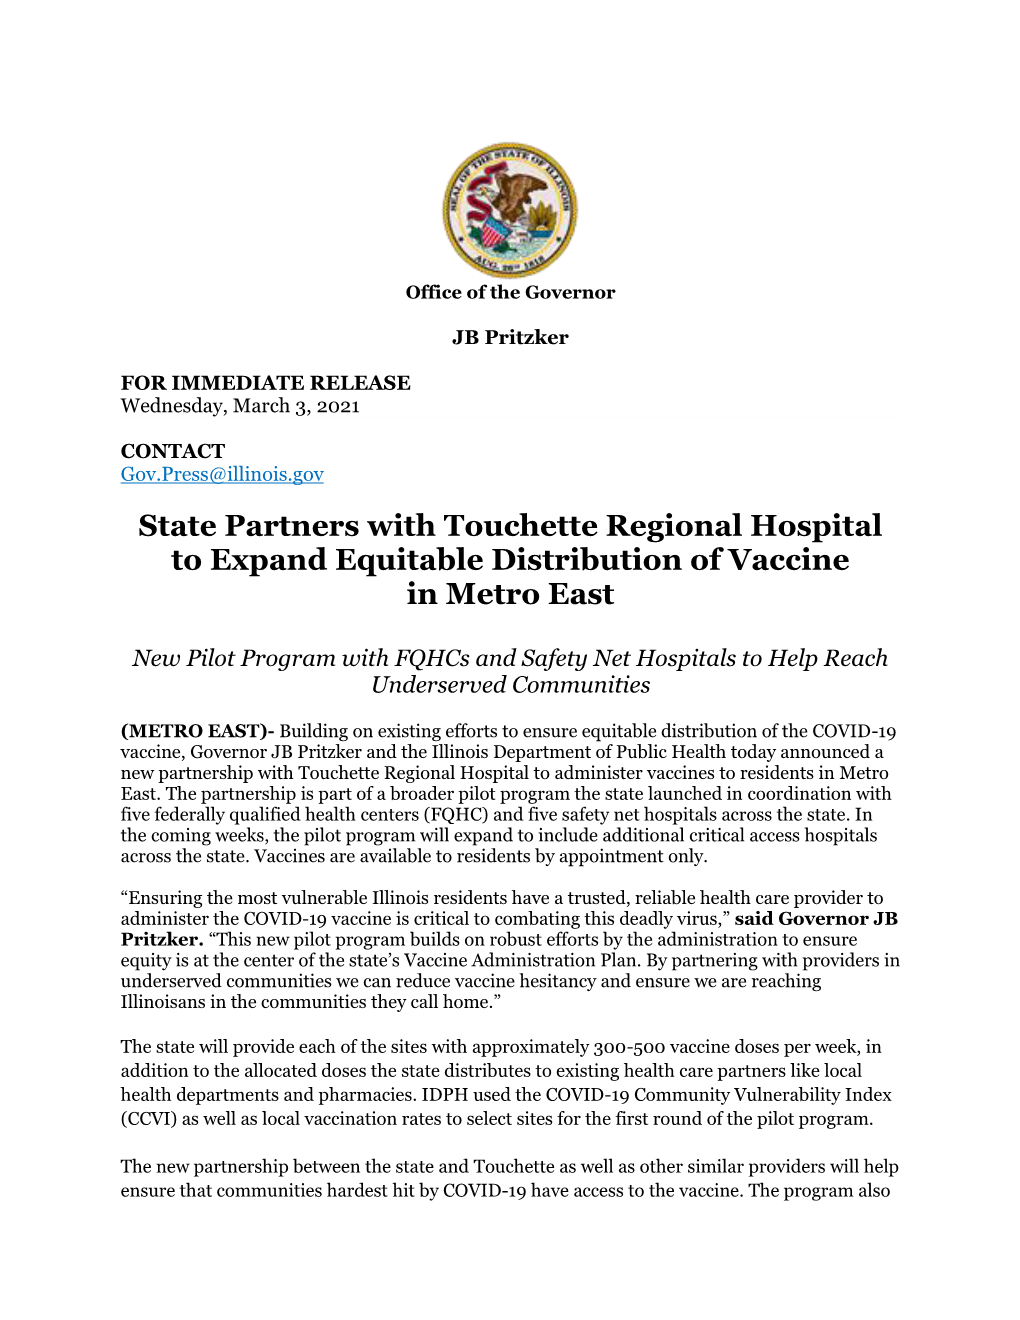 State Partners with Touchette Regional Hospital to Expand Equitable Distribution of Vaccine in Metro East